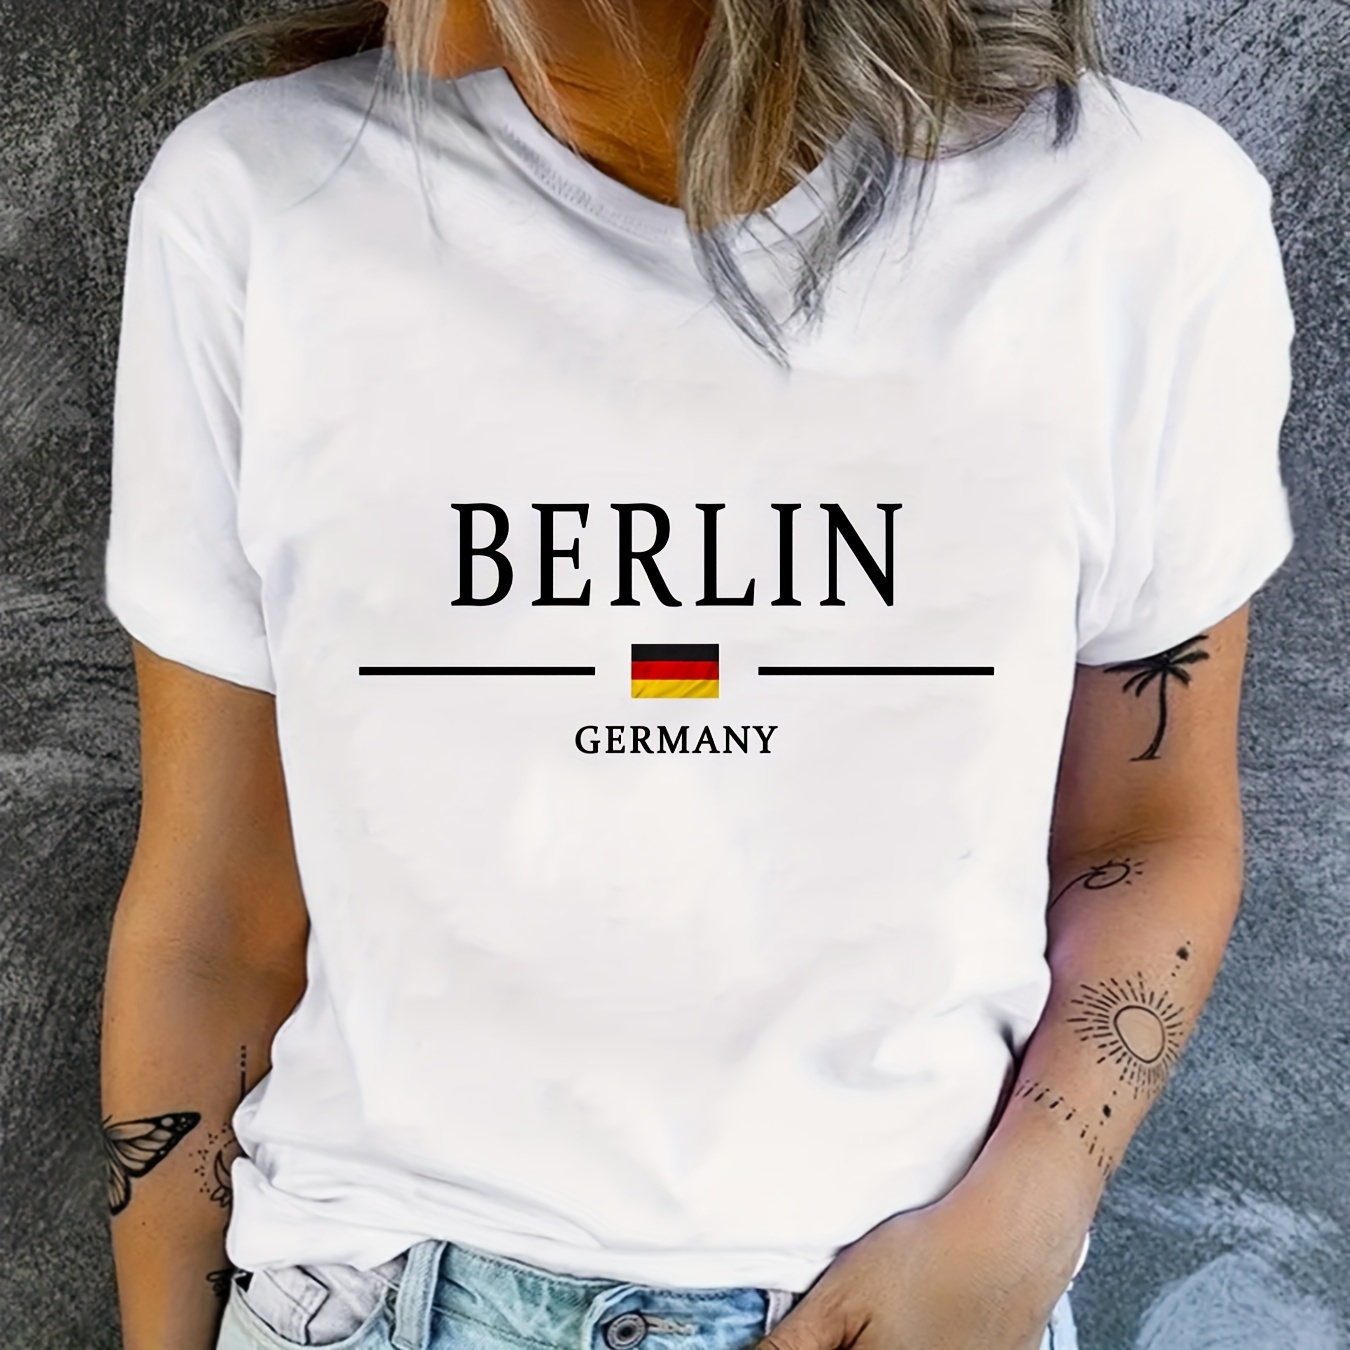 

Berlin Germany Iron-on Transfer Decal, Black Polyurethane Diy Heat Press Applique For T-shirts, Jackets, Pants - Single Pack